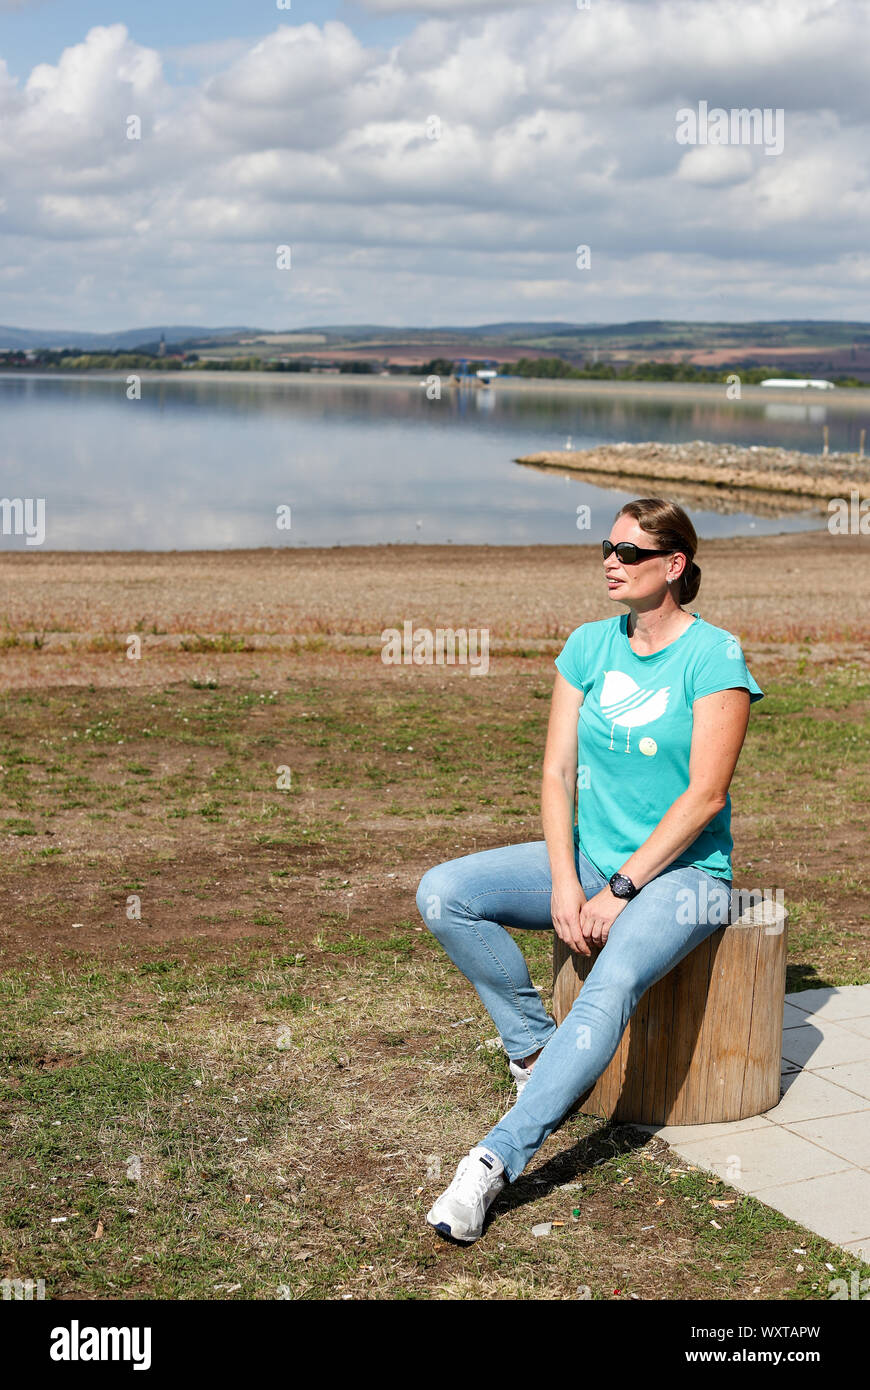 12 September 2019, Saxony-Anhalt, Kelbra: Former shot-putter Nadine Kleinert walks along the Kelbra reservoir. Lack of attractiveness for teenagers, hardly any TV presence, frustrated coaches and the often lacking financial security of the athletes: The former world-class shot-putter does not give the Olympic core sport a great future. 'If things continue like this, athletics will be dead in ten years - and the DLV will no longer exist,' said the 2004 Olympic silver medallist in an interview with the German Press Agency. (to dpa 'Ex-ball-putter Kleinert: 'This is no longer my athletics!') ») P Stock Photo